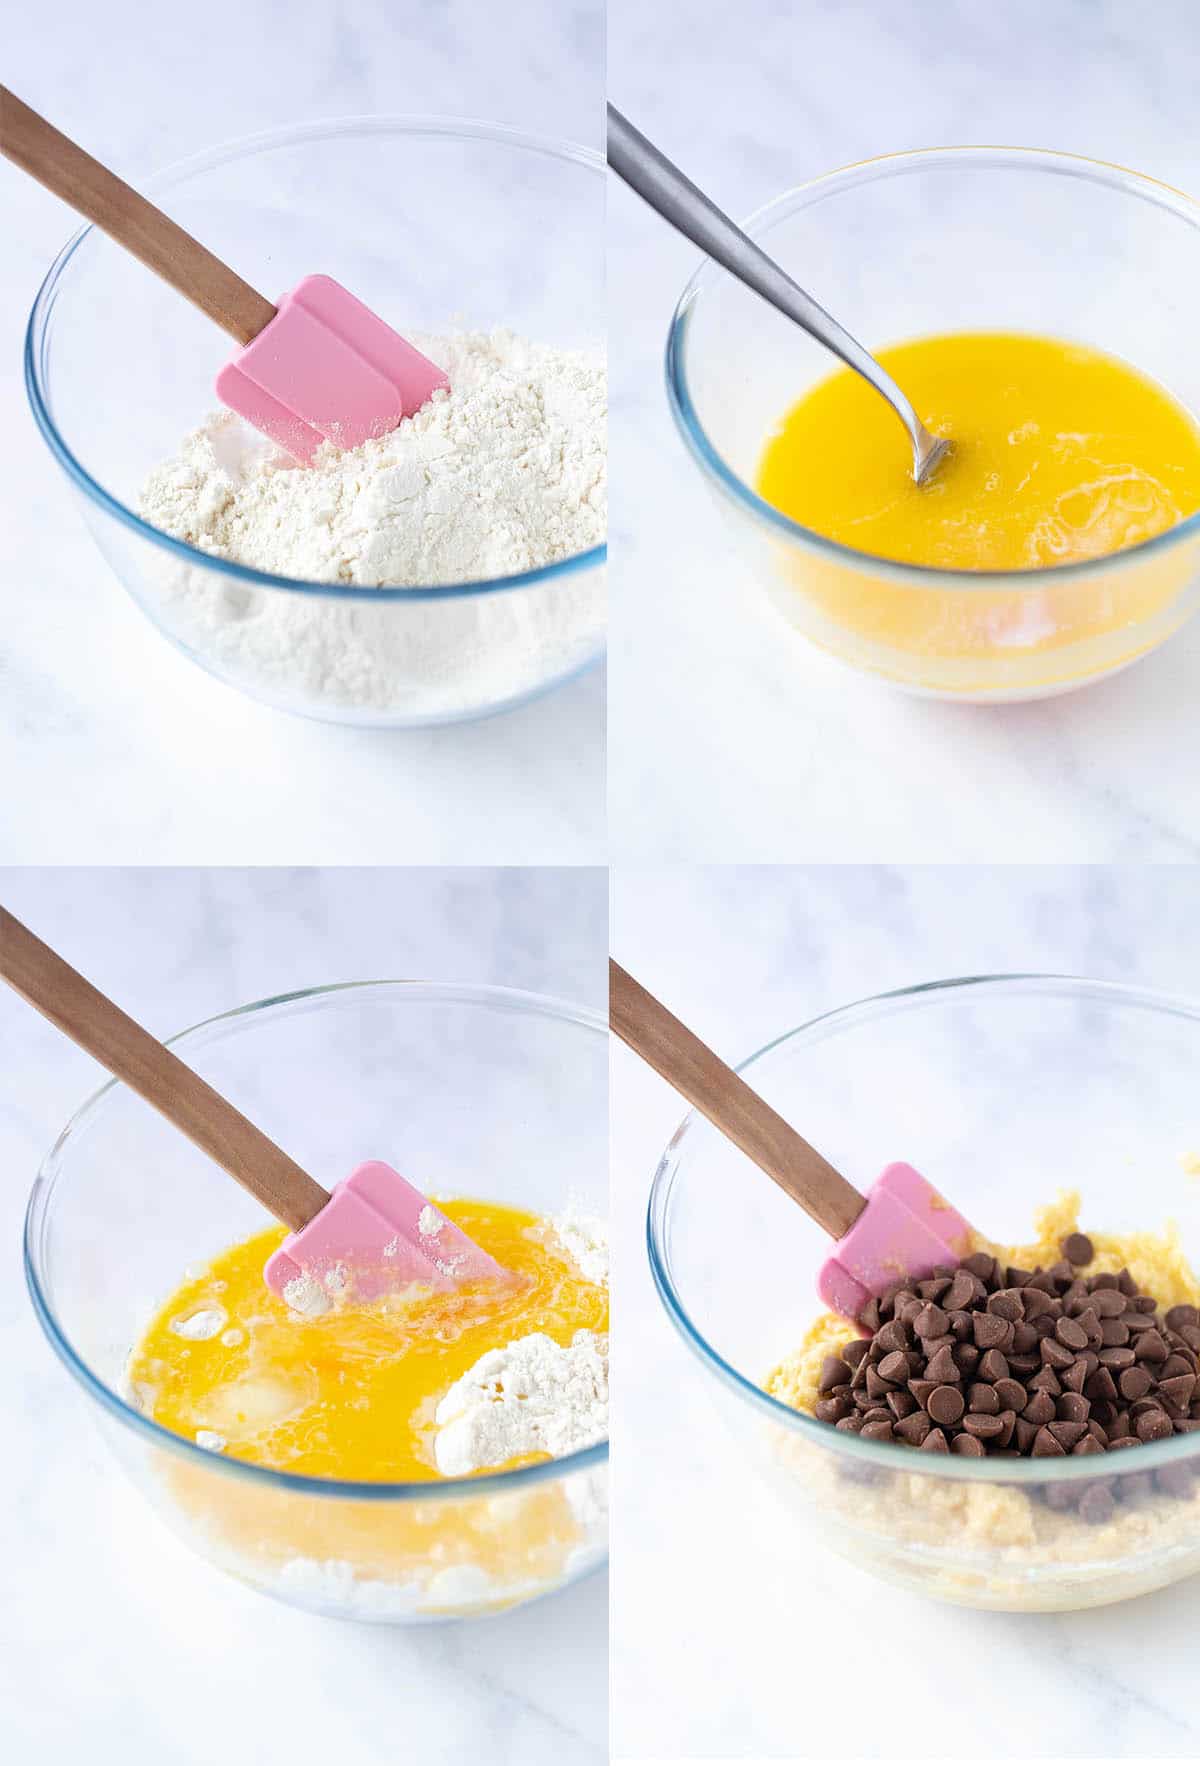 A step by step photo tutorial showing how to mix and stir muffin batter.